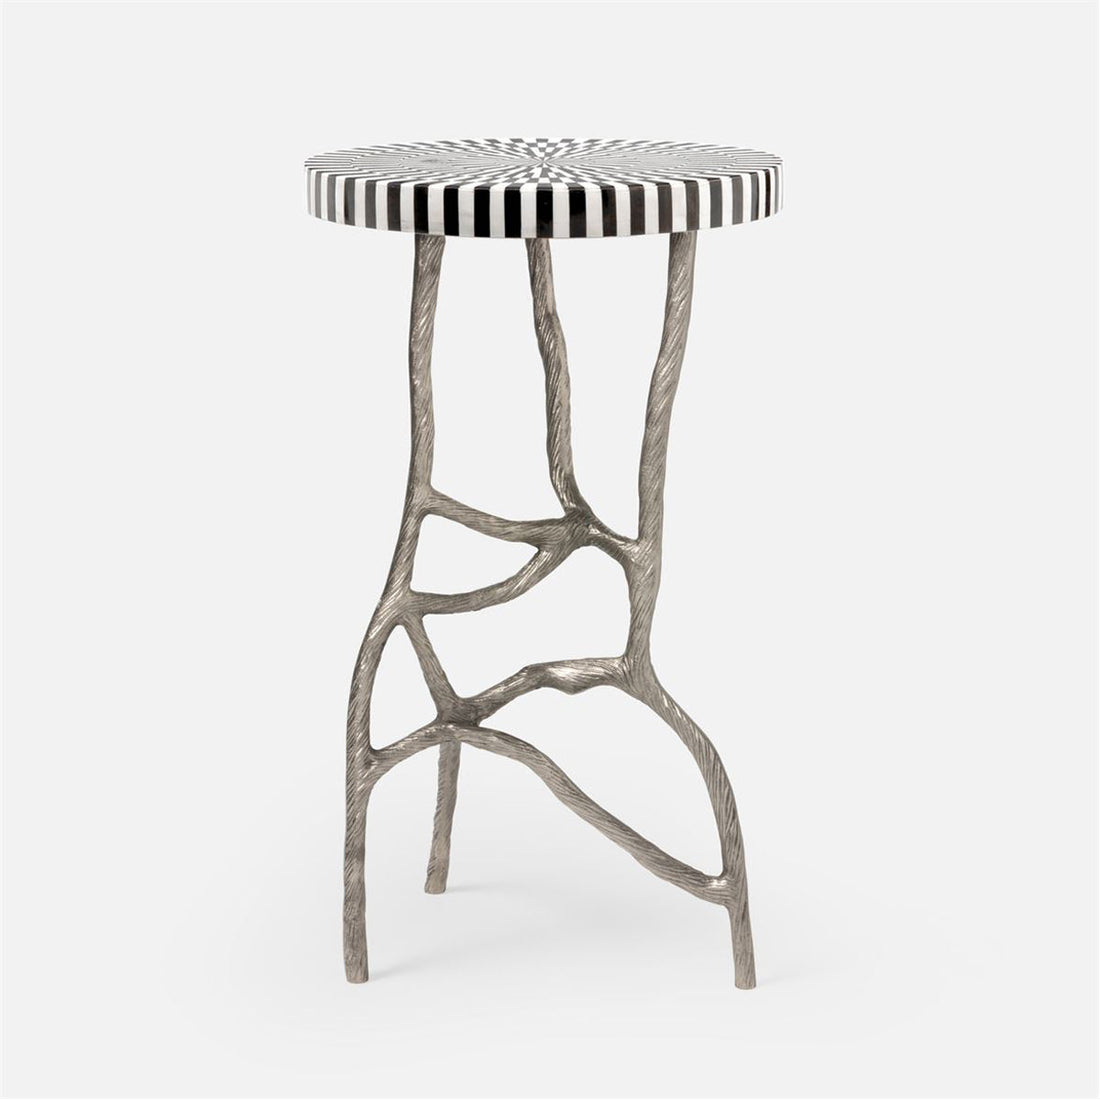 Made Goods Genevier Brass Tripod Base Side Table in Striped Marble